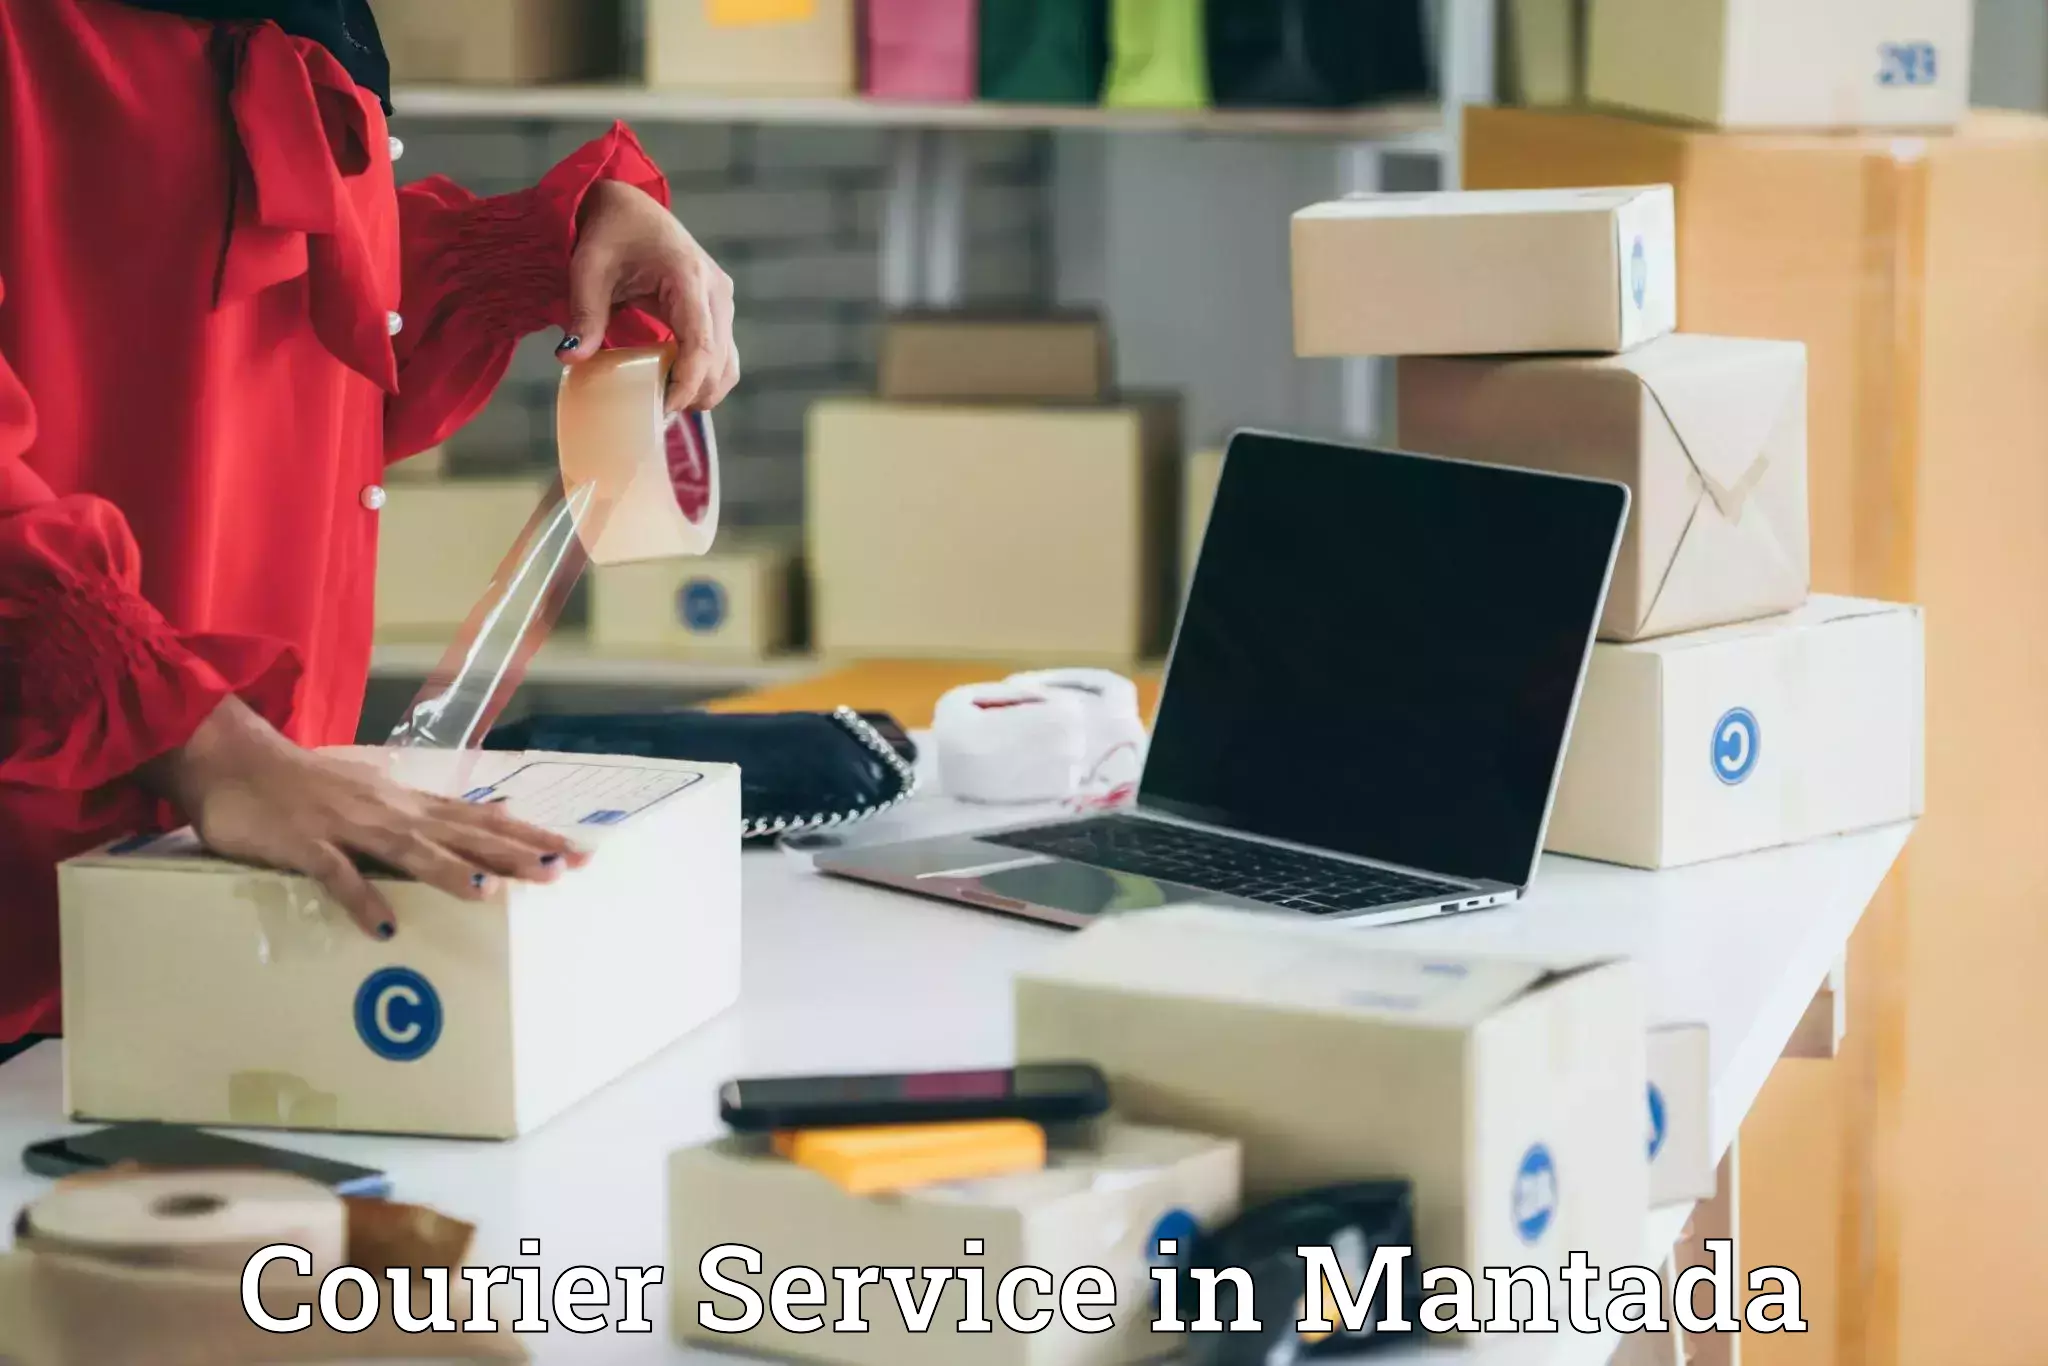 Express delivery capabilities in Mantada